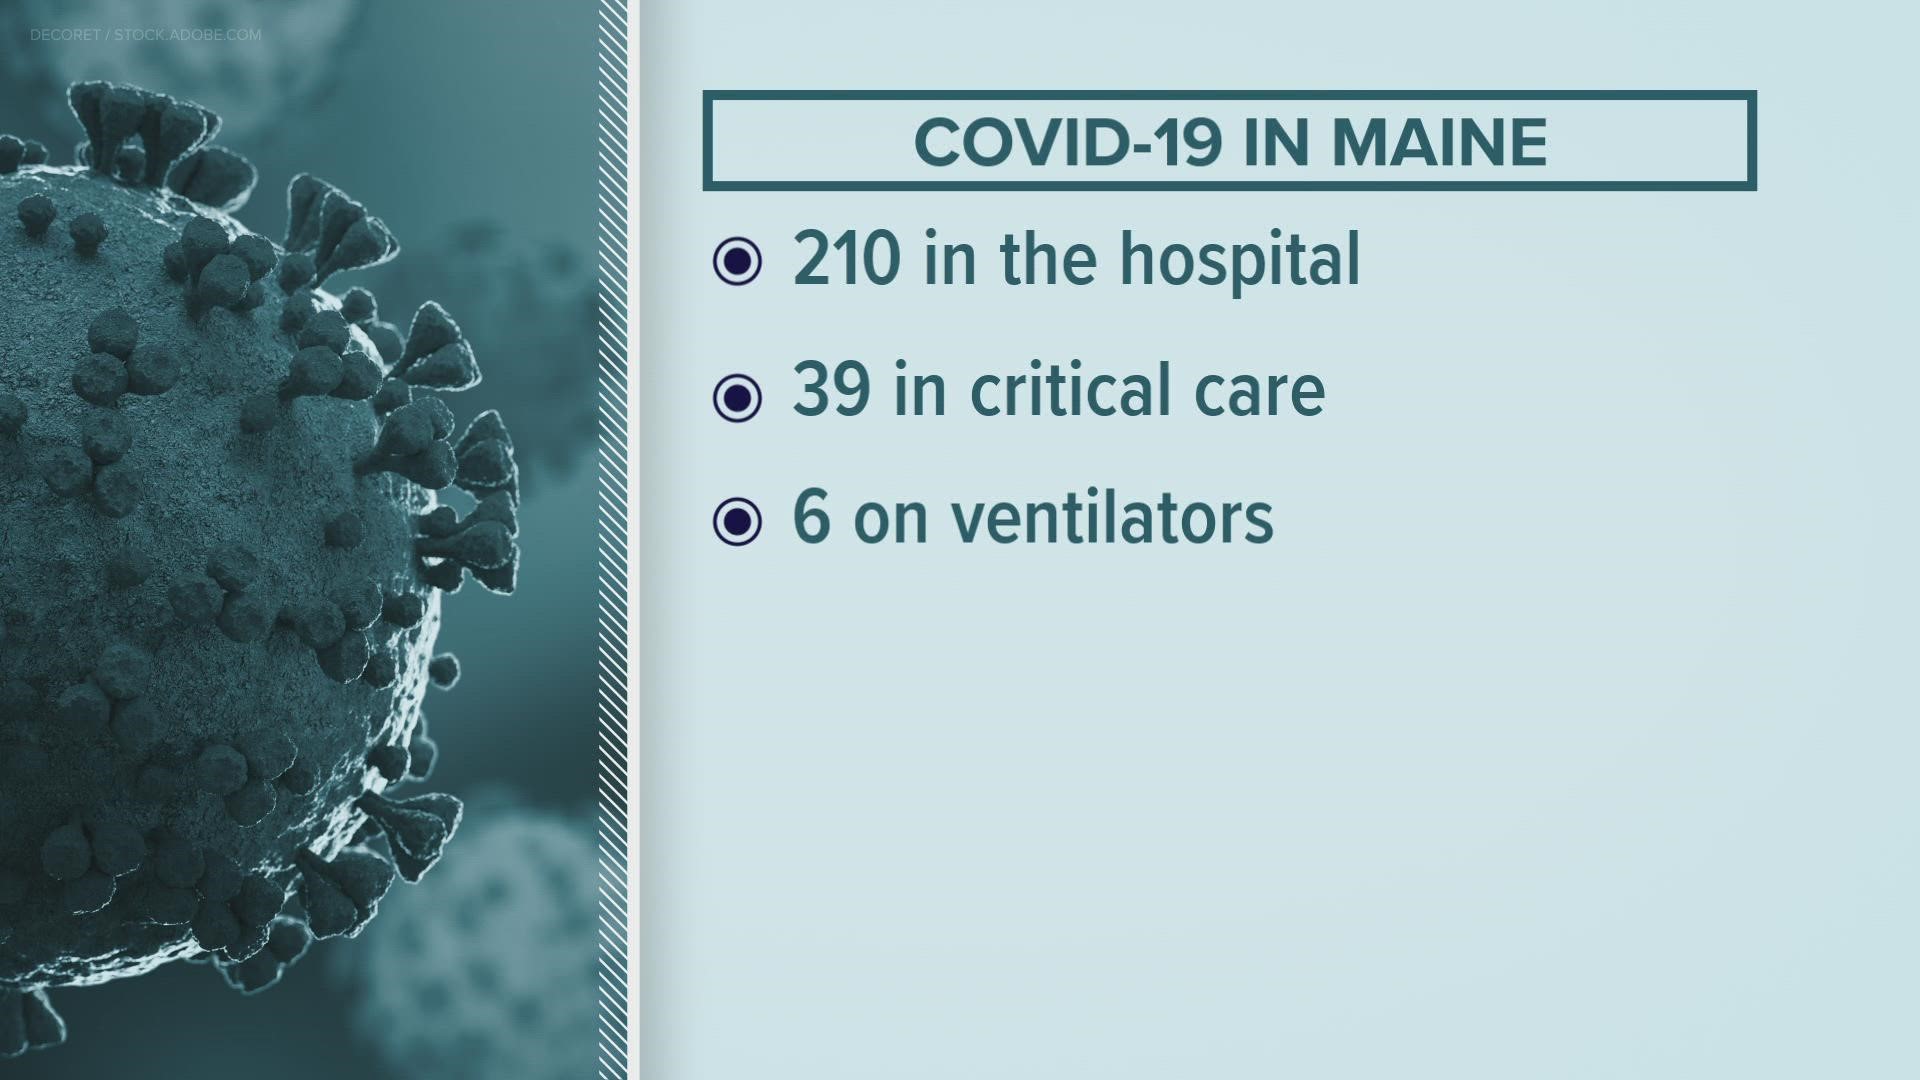 The last time hospitalization numbers were this high was back in May. Doctors say the best way to protect yourself from the flu and COVID-19 is to get vaccinated.